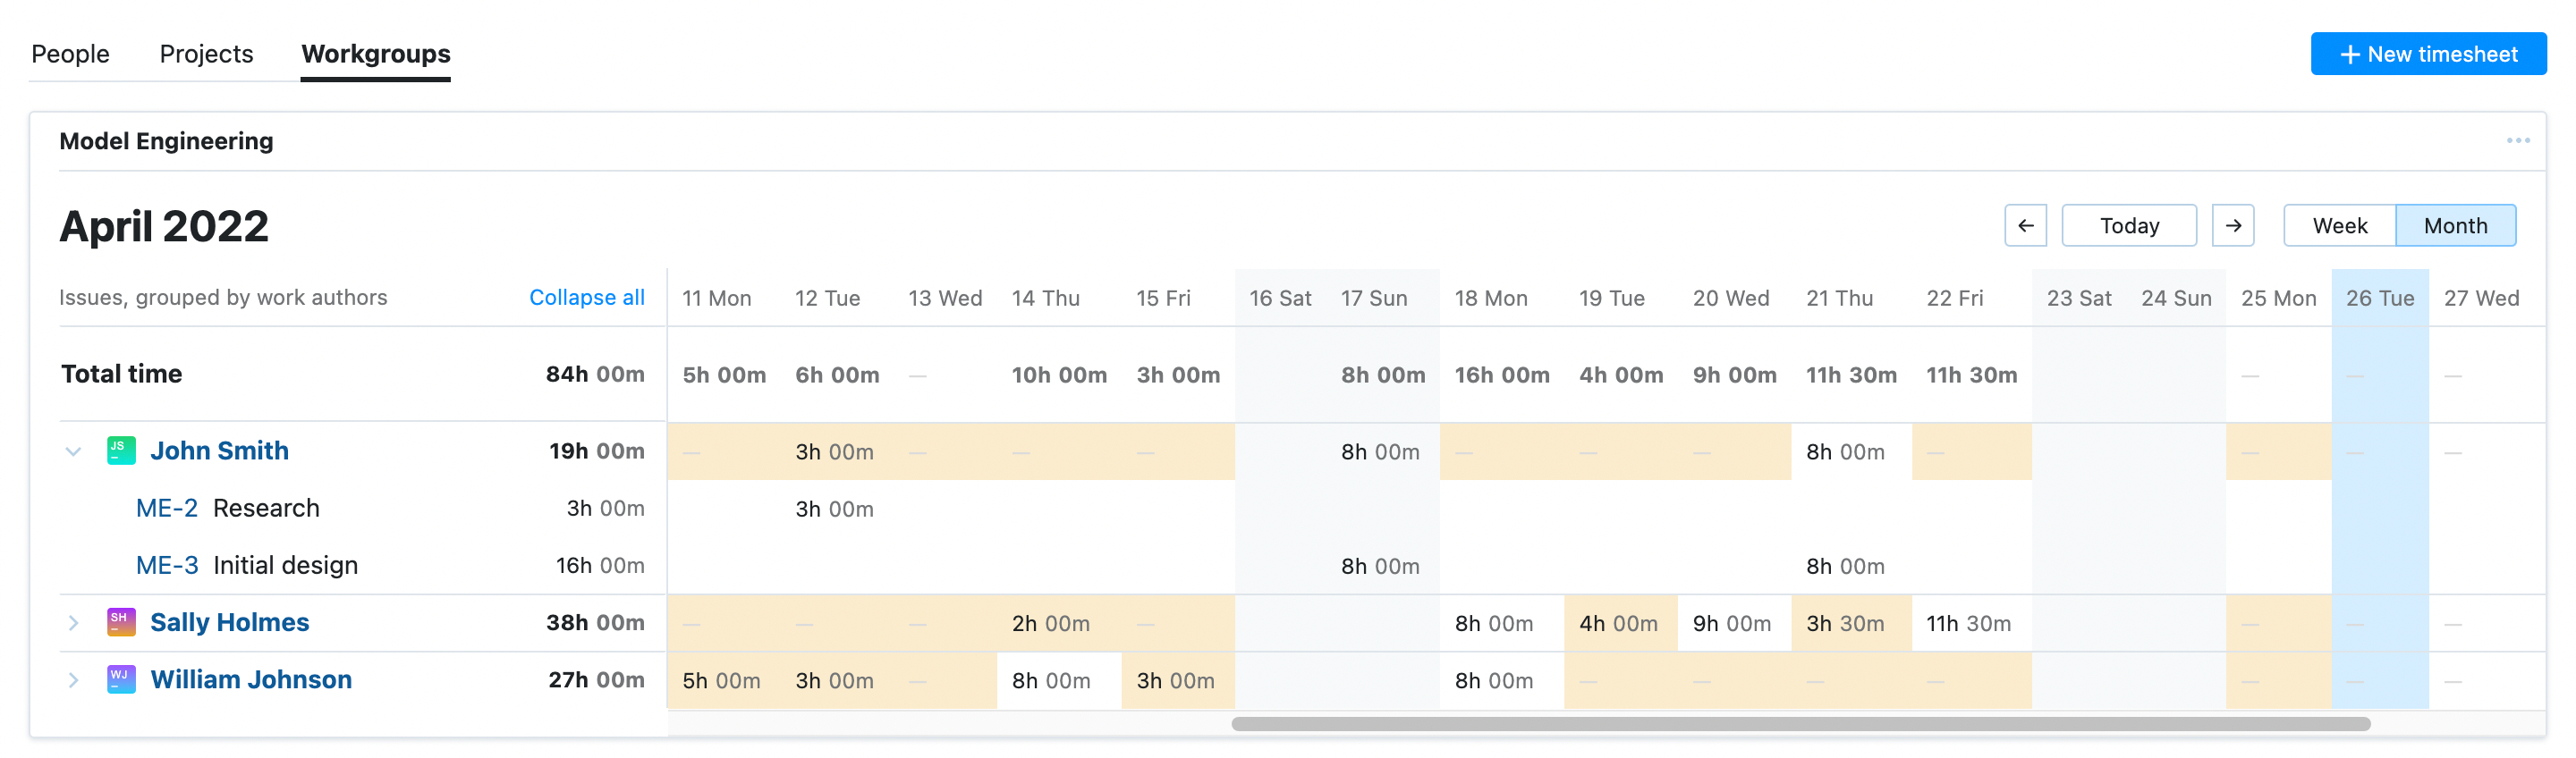 Timesheets for workgroups